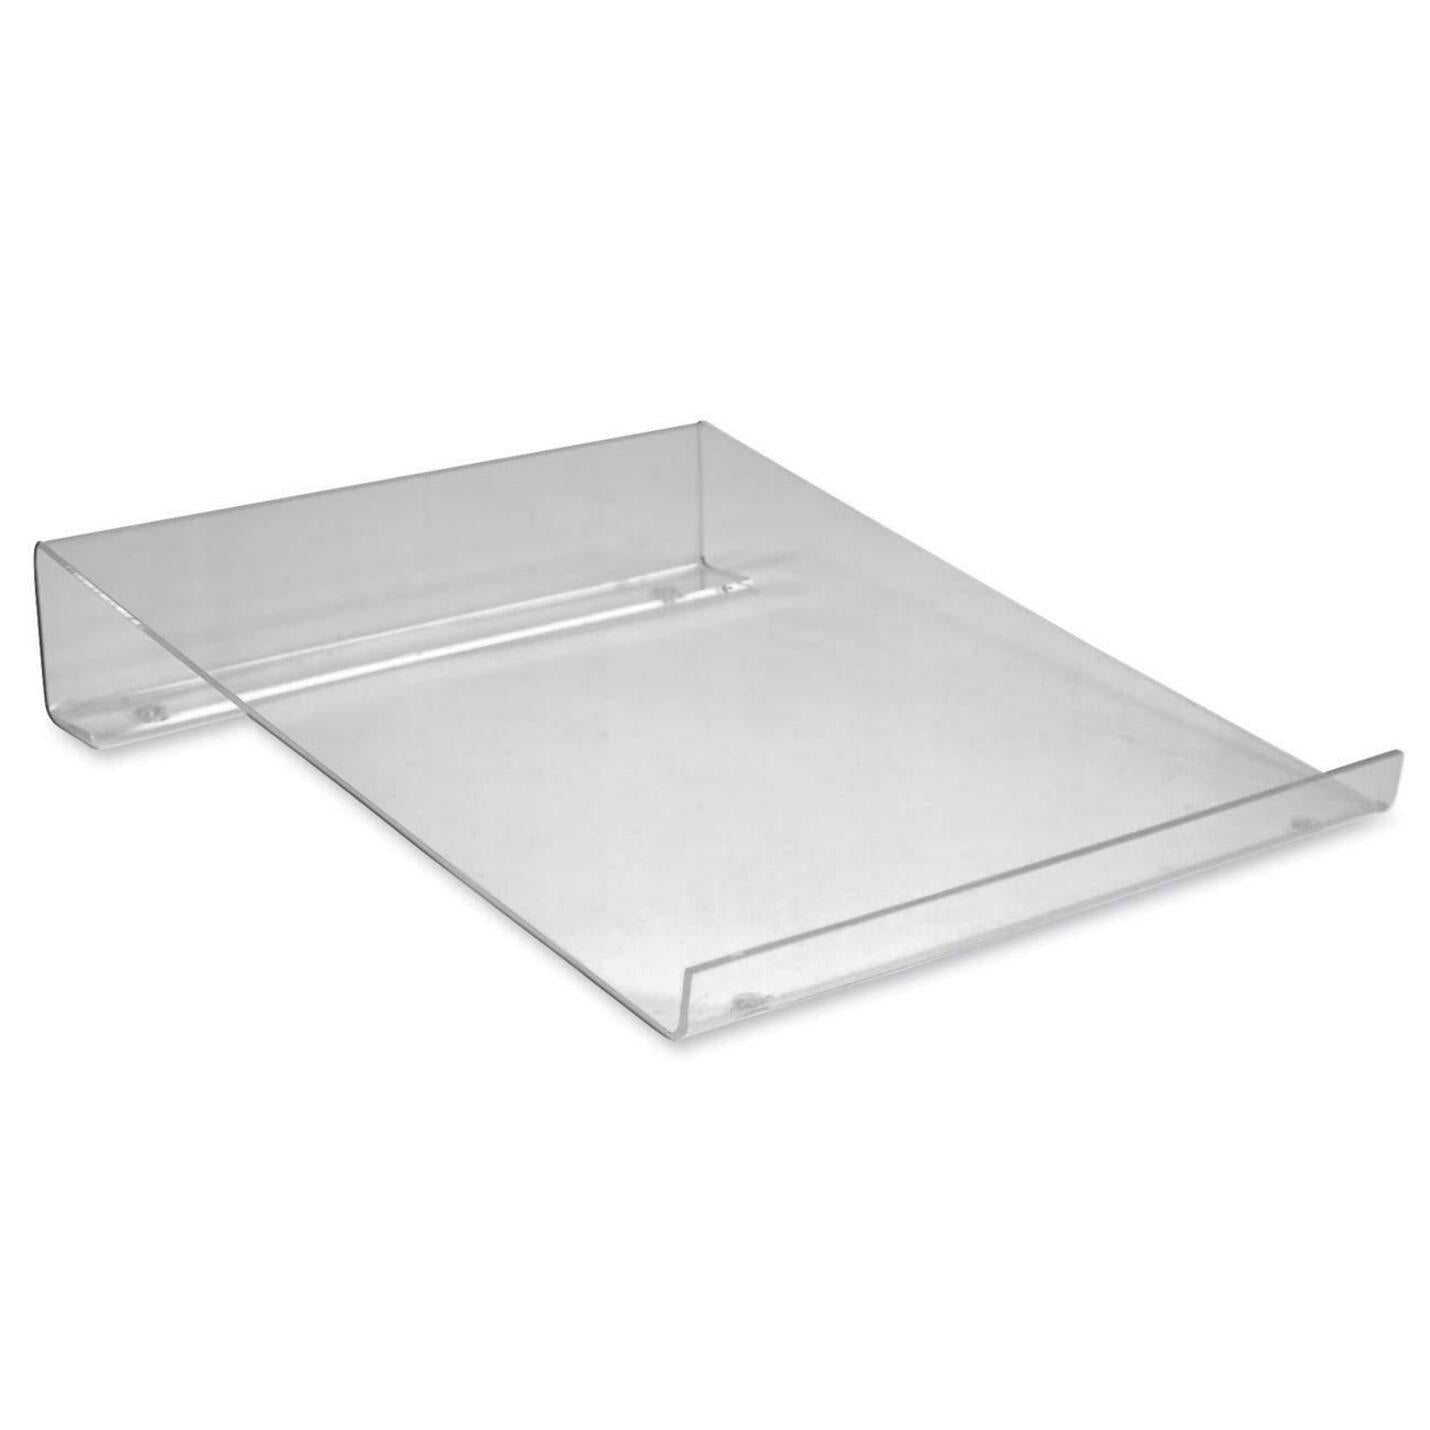 Victor LS125 Clear Acrylic Calculator Stand, 9.5"x12"x3.5", Non-Assembly Required